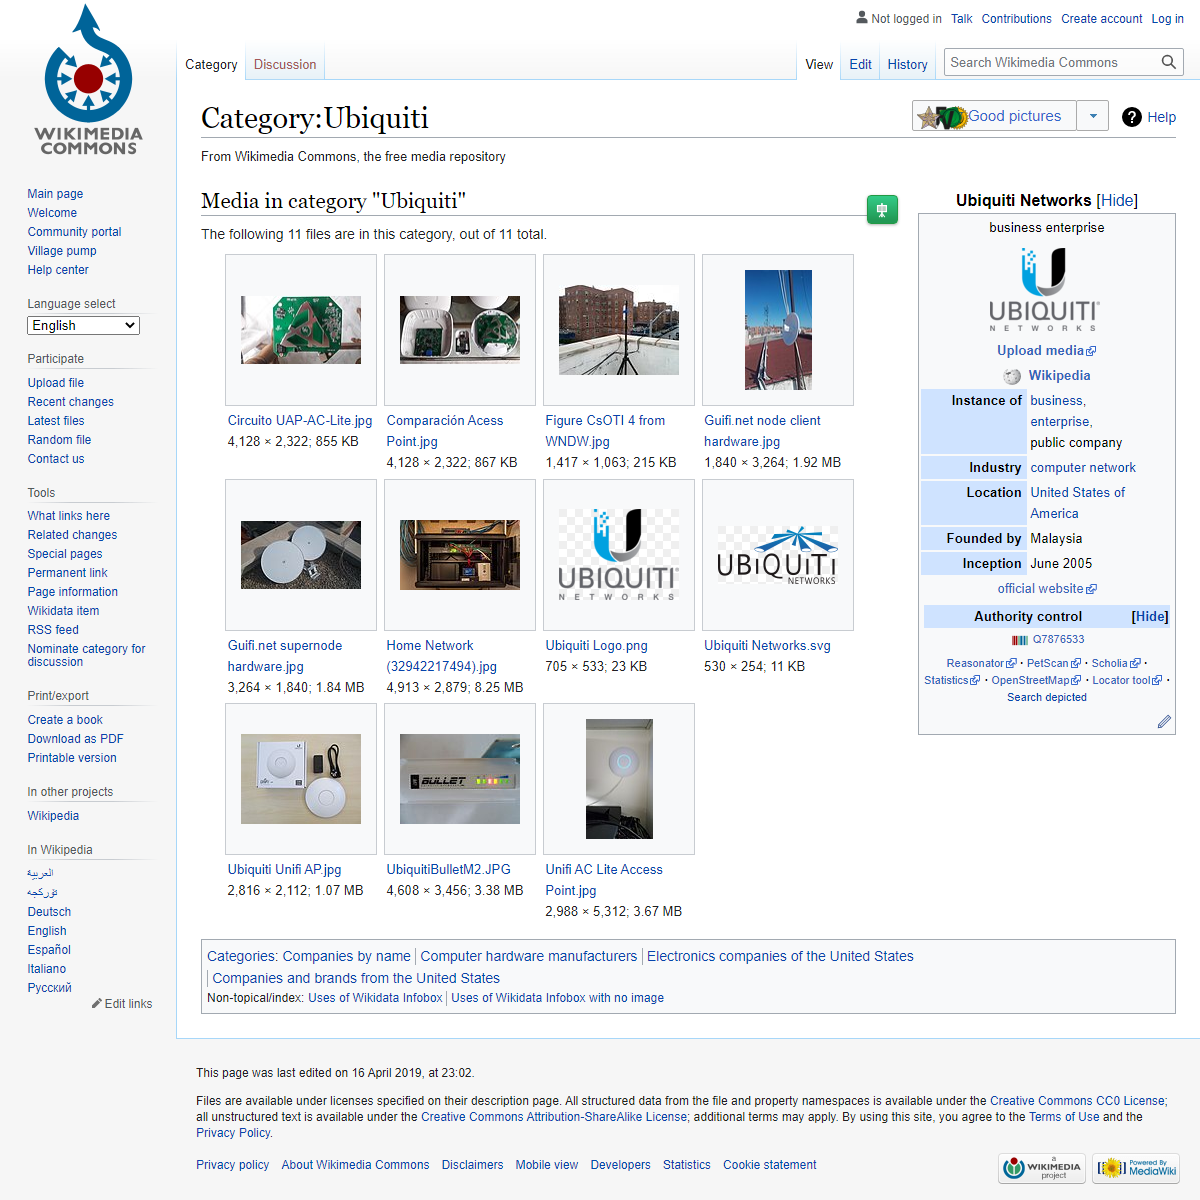 A complete backup of https://commons.wikimedia.org/wiki/Category:Ubiquiti